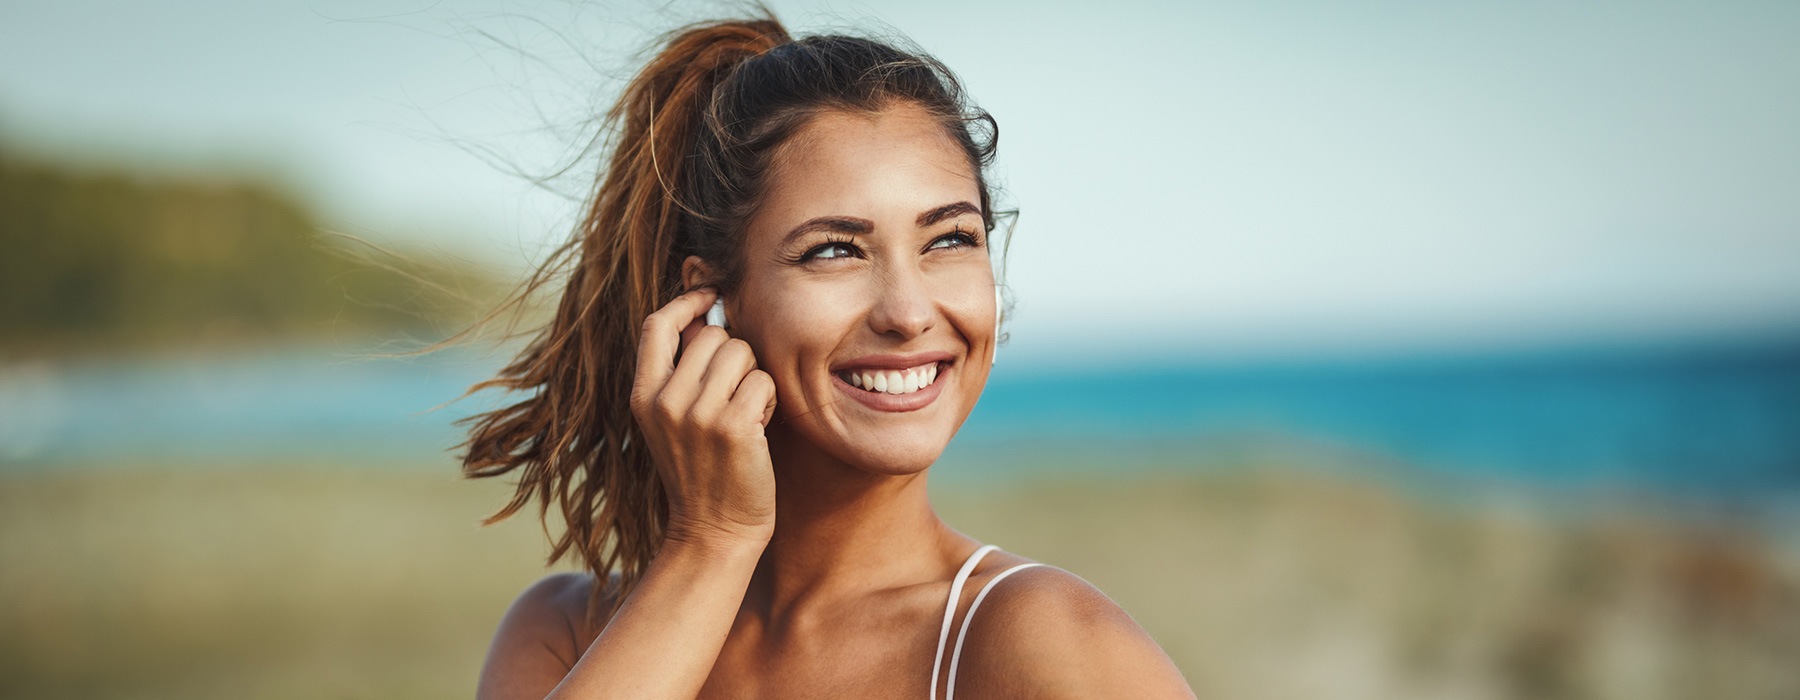 lifestyle image of a woman smiling and looking to the distance outside